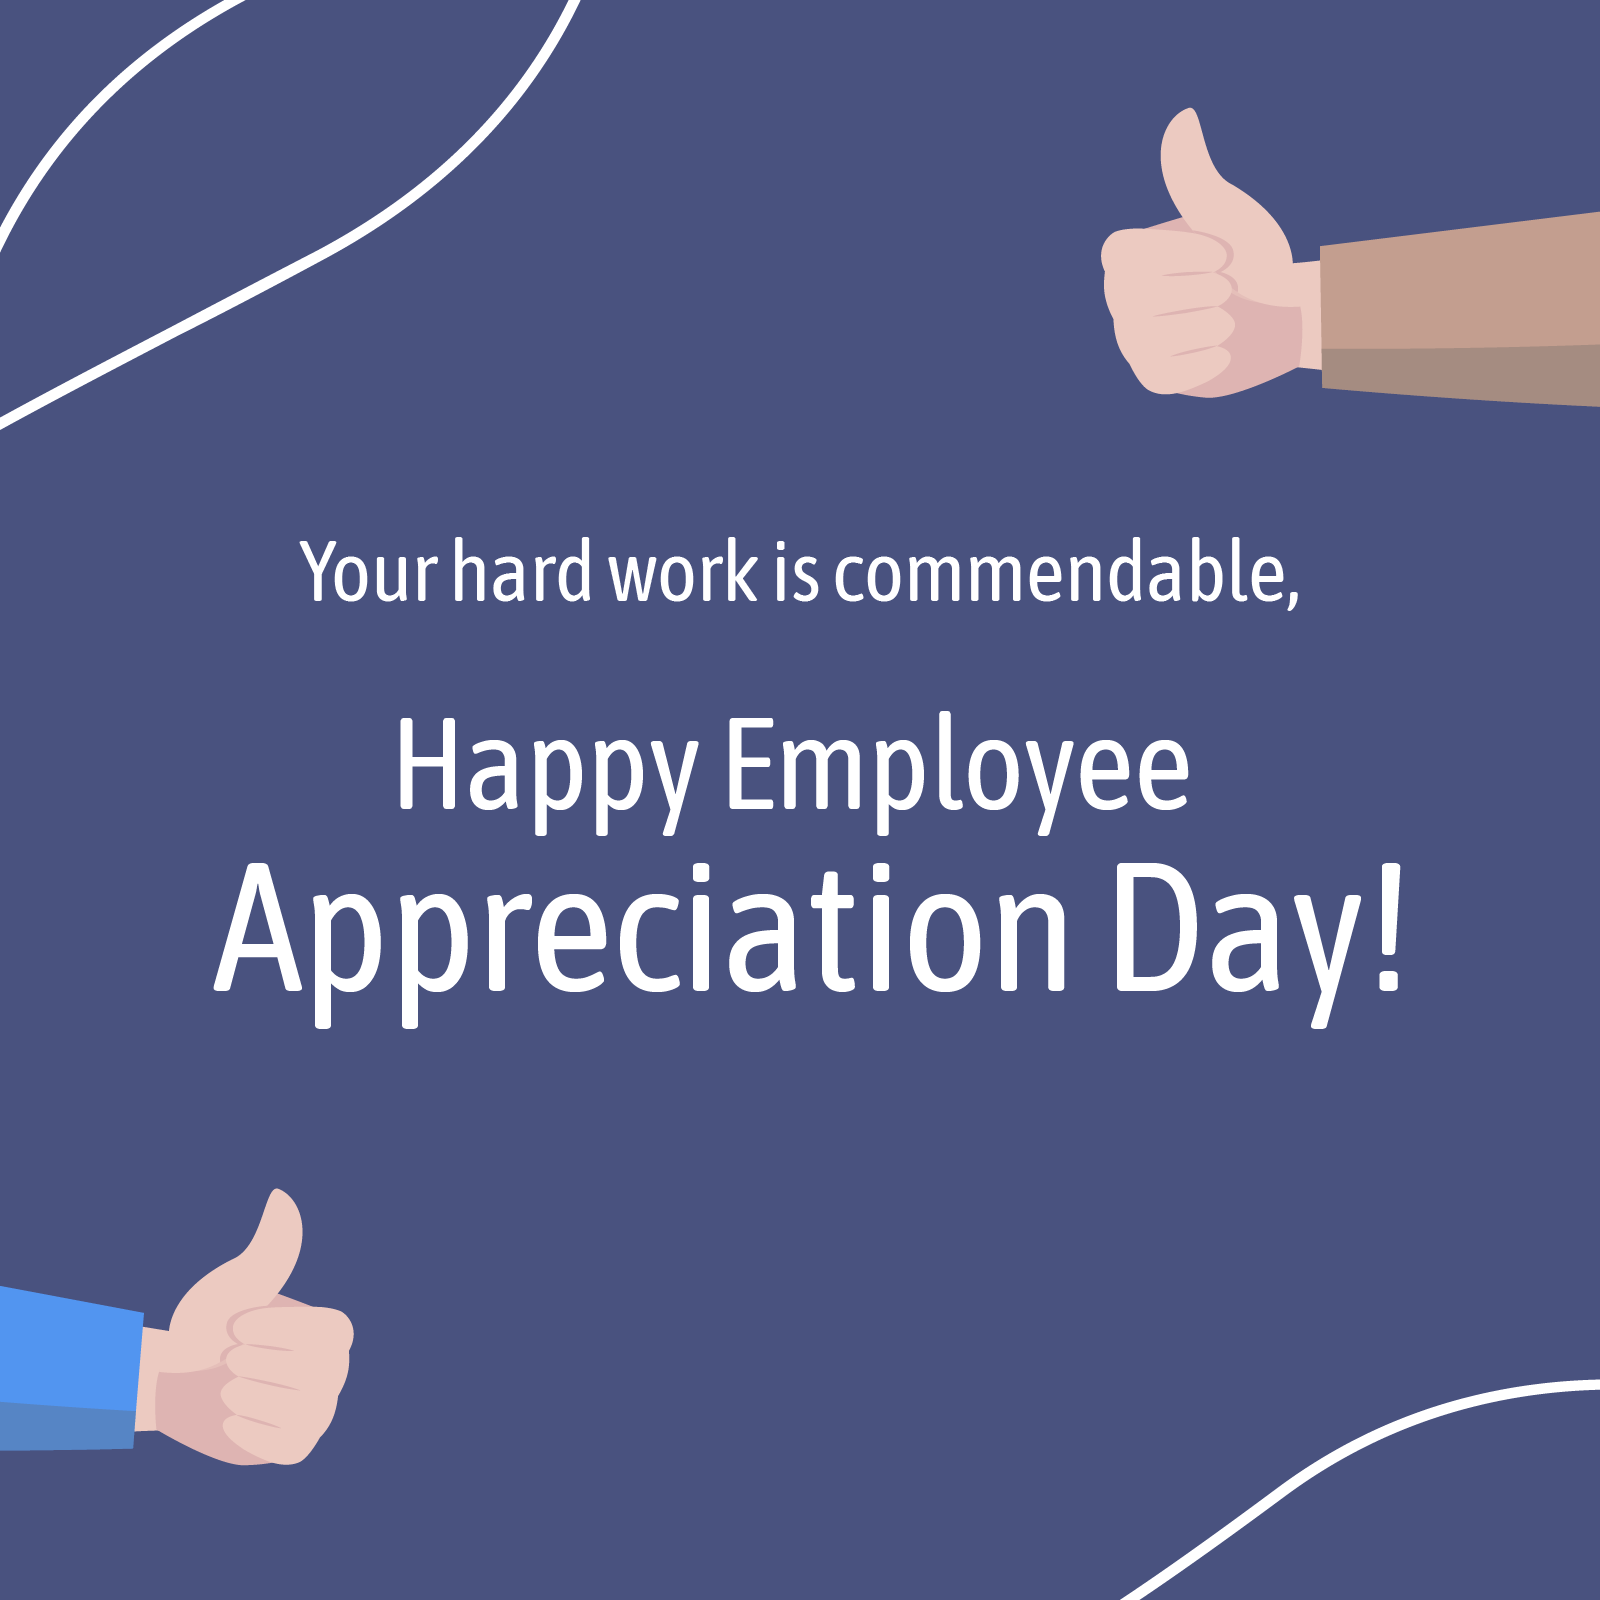 Free Employee Appreciation Day Wishes Vector